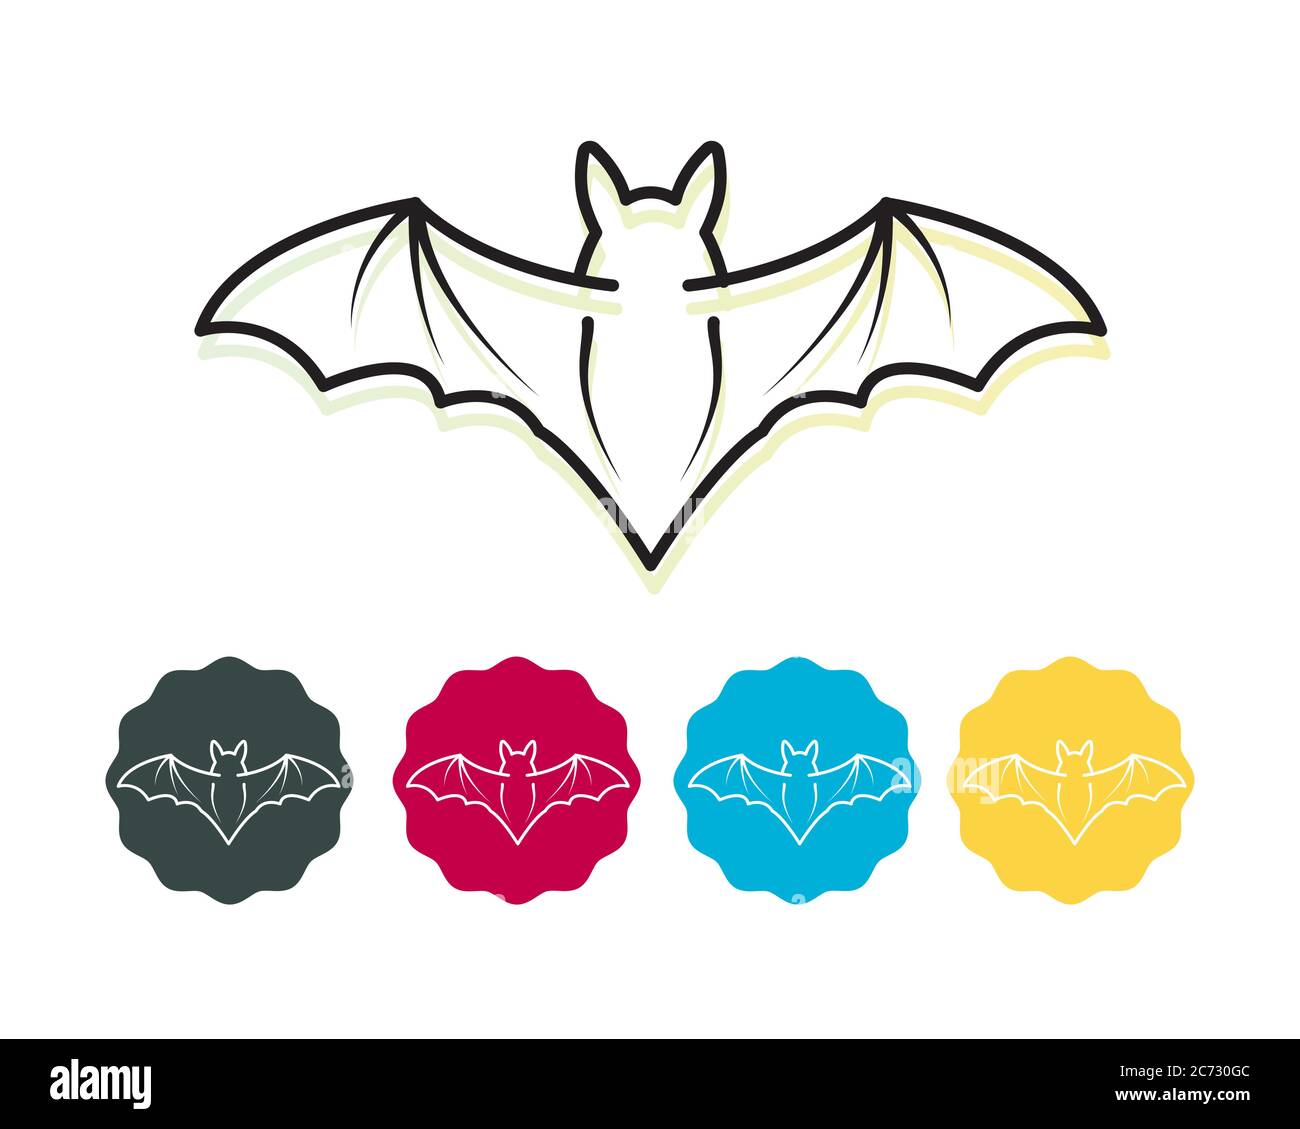 Fruit Bat - carriers of potentially pathogenic Coronavirus (CoV) - Icon as EPS 10 File Stock Vector